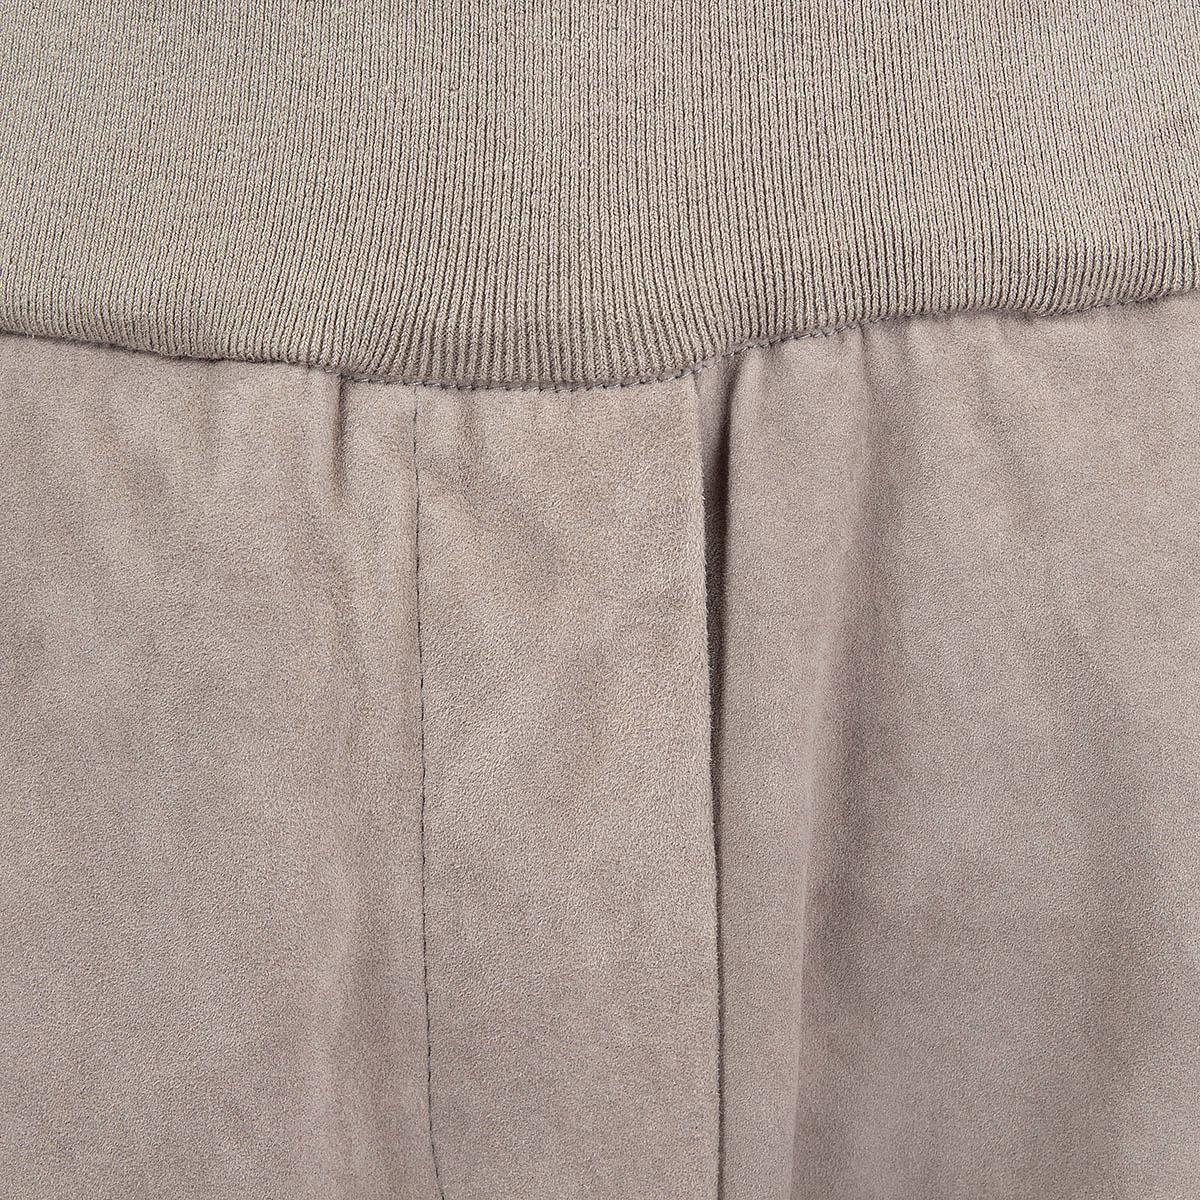 BRUNELLO CUCINELLI grey suede JOGGING Pants 40 S In Excellent Condition For Sale In Zürich, CH